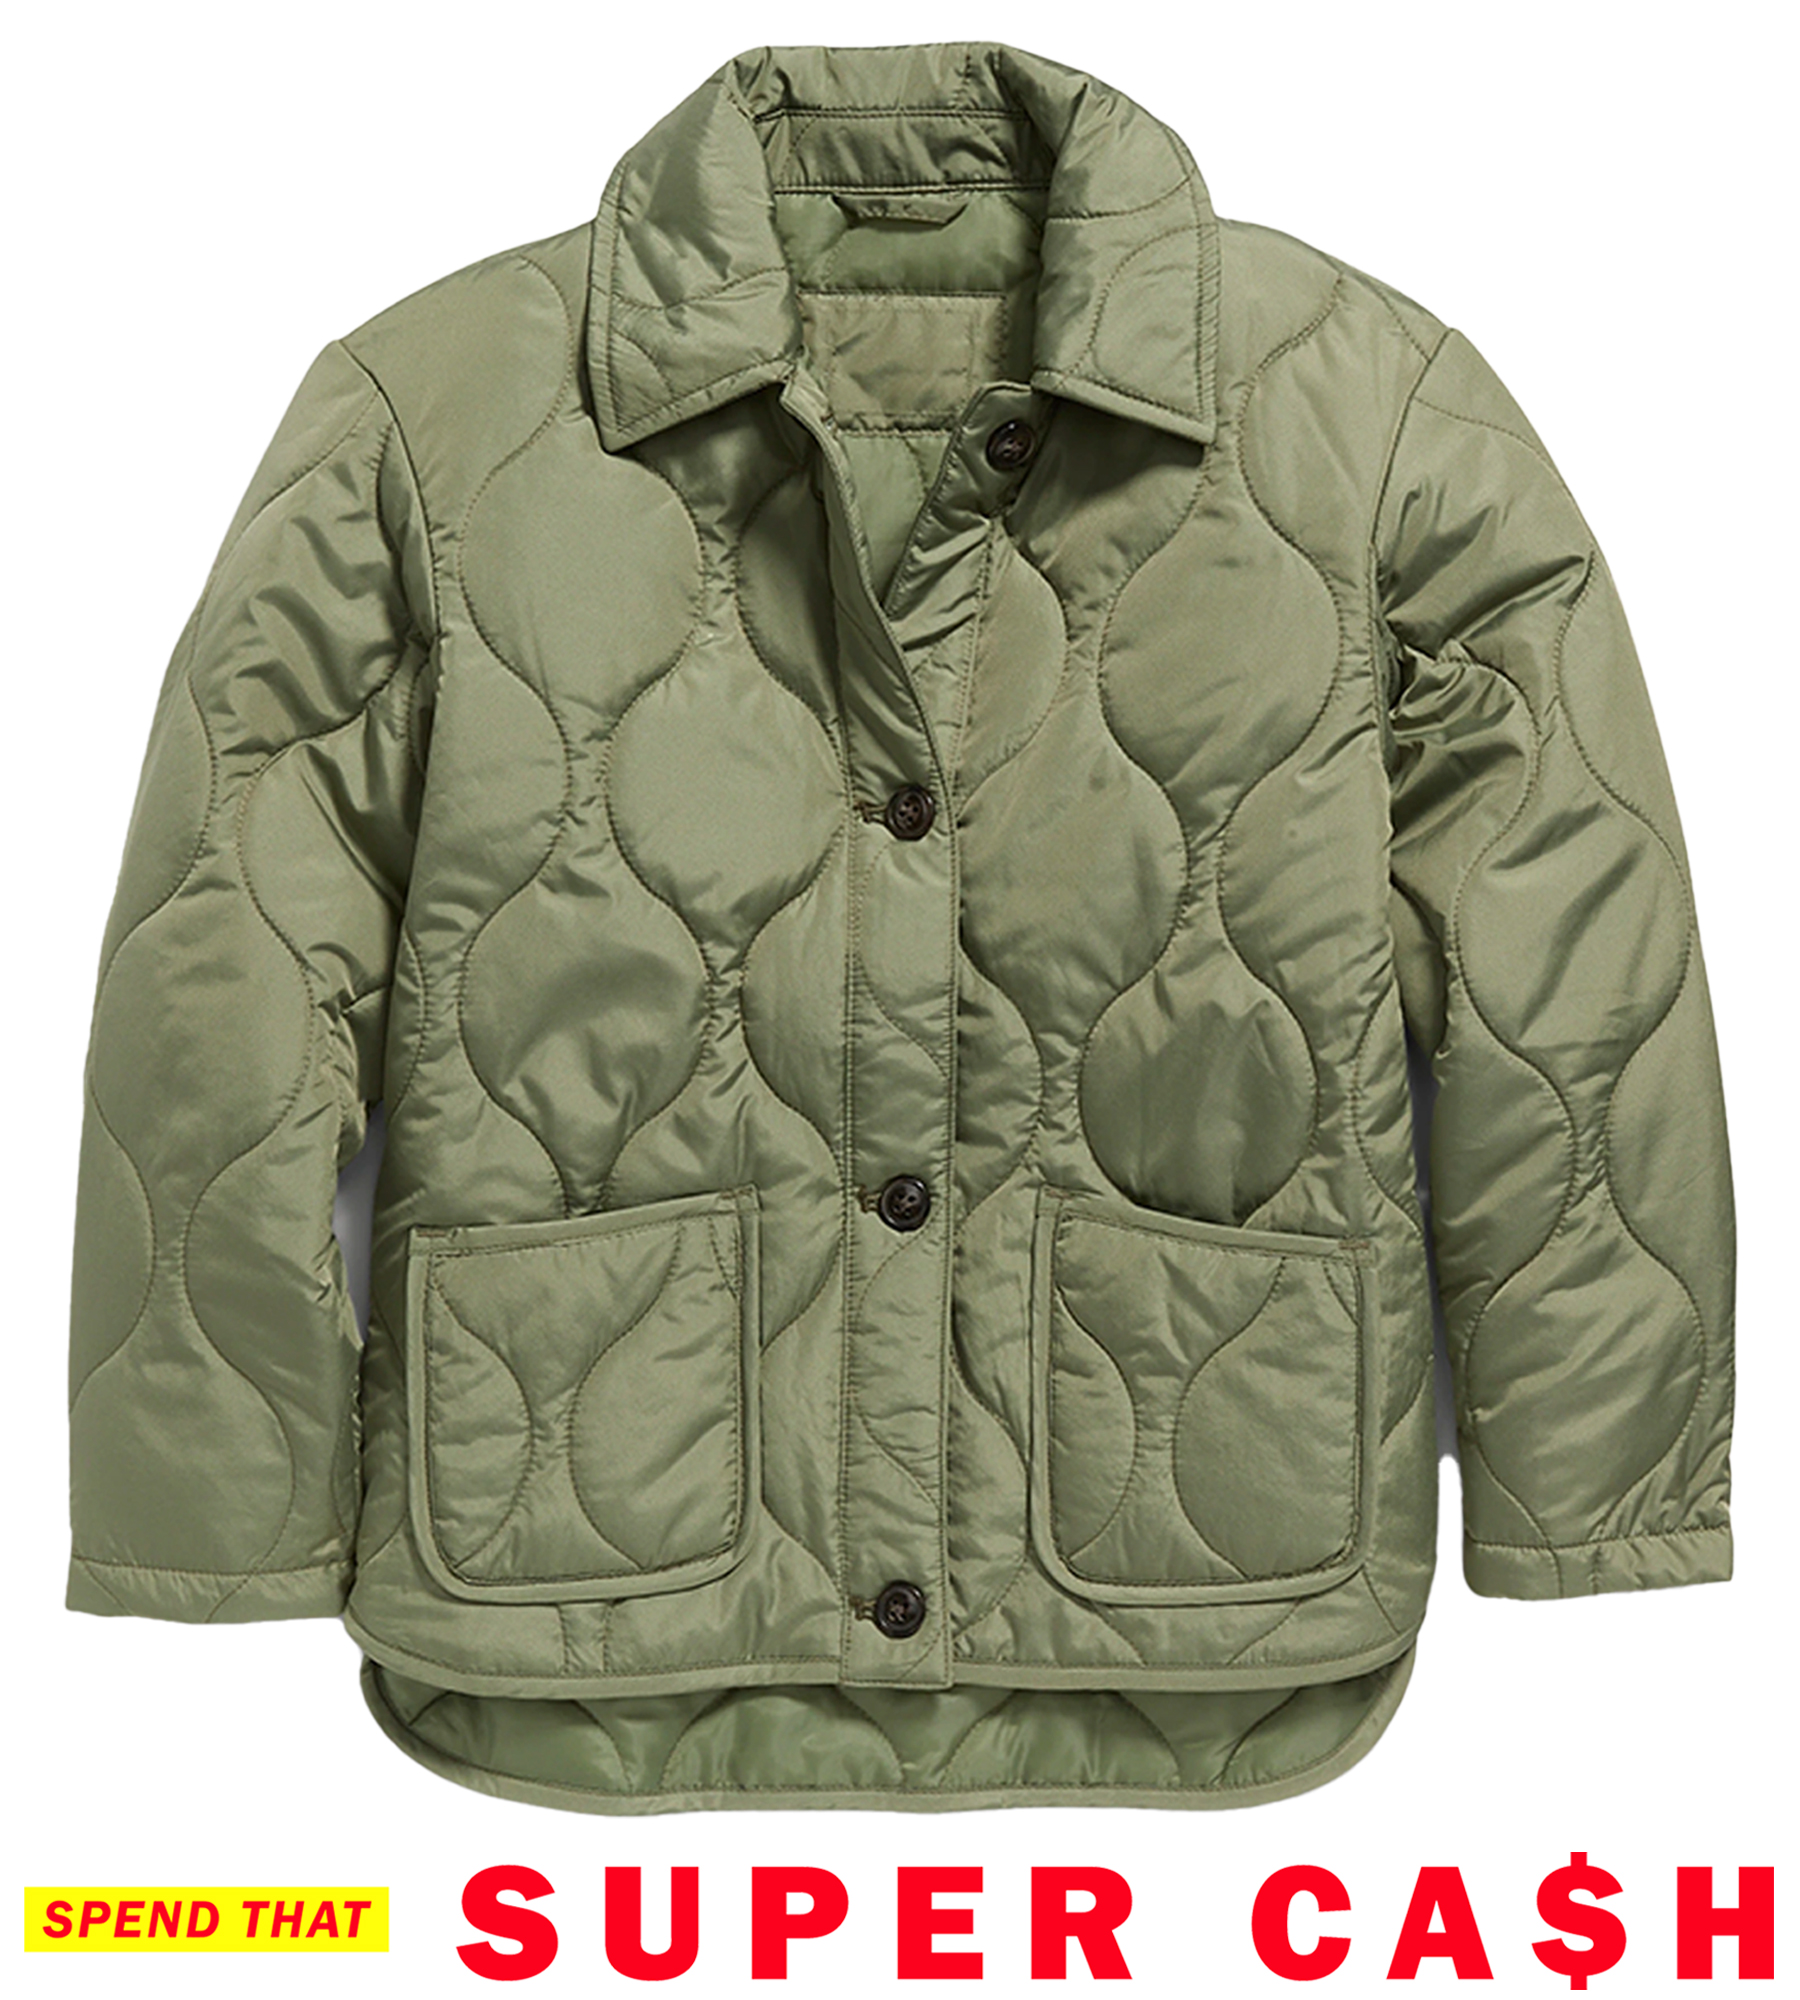 Old Navy Water-Resistant Jackets: Girls' Quilted (Button-Front or Hooded) $16, Boys' Puffer (Black) $17, Women's Short Puffer from $20 AFTER $10 Super Cash + Free store pickup